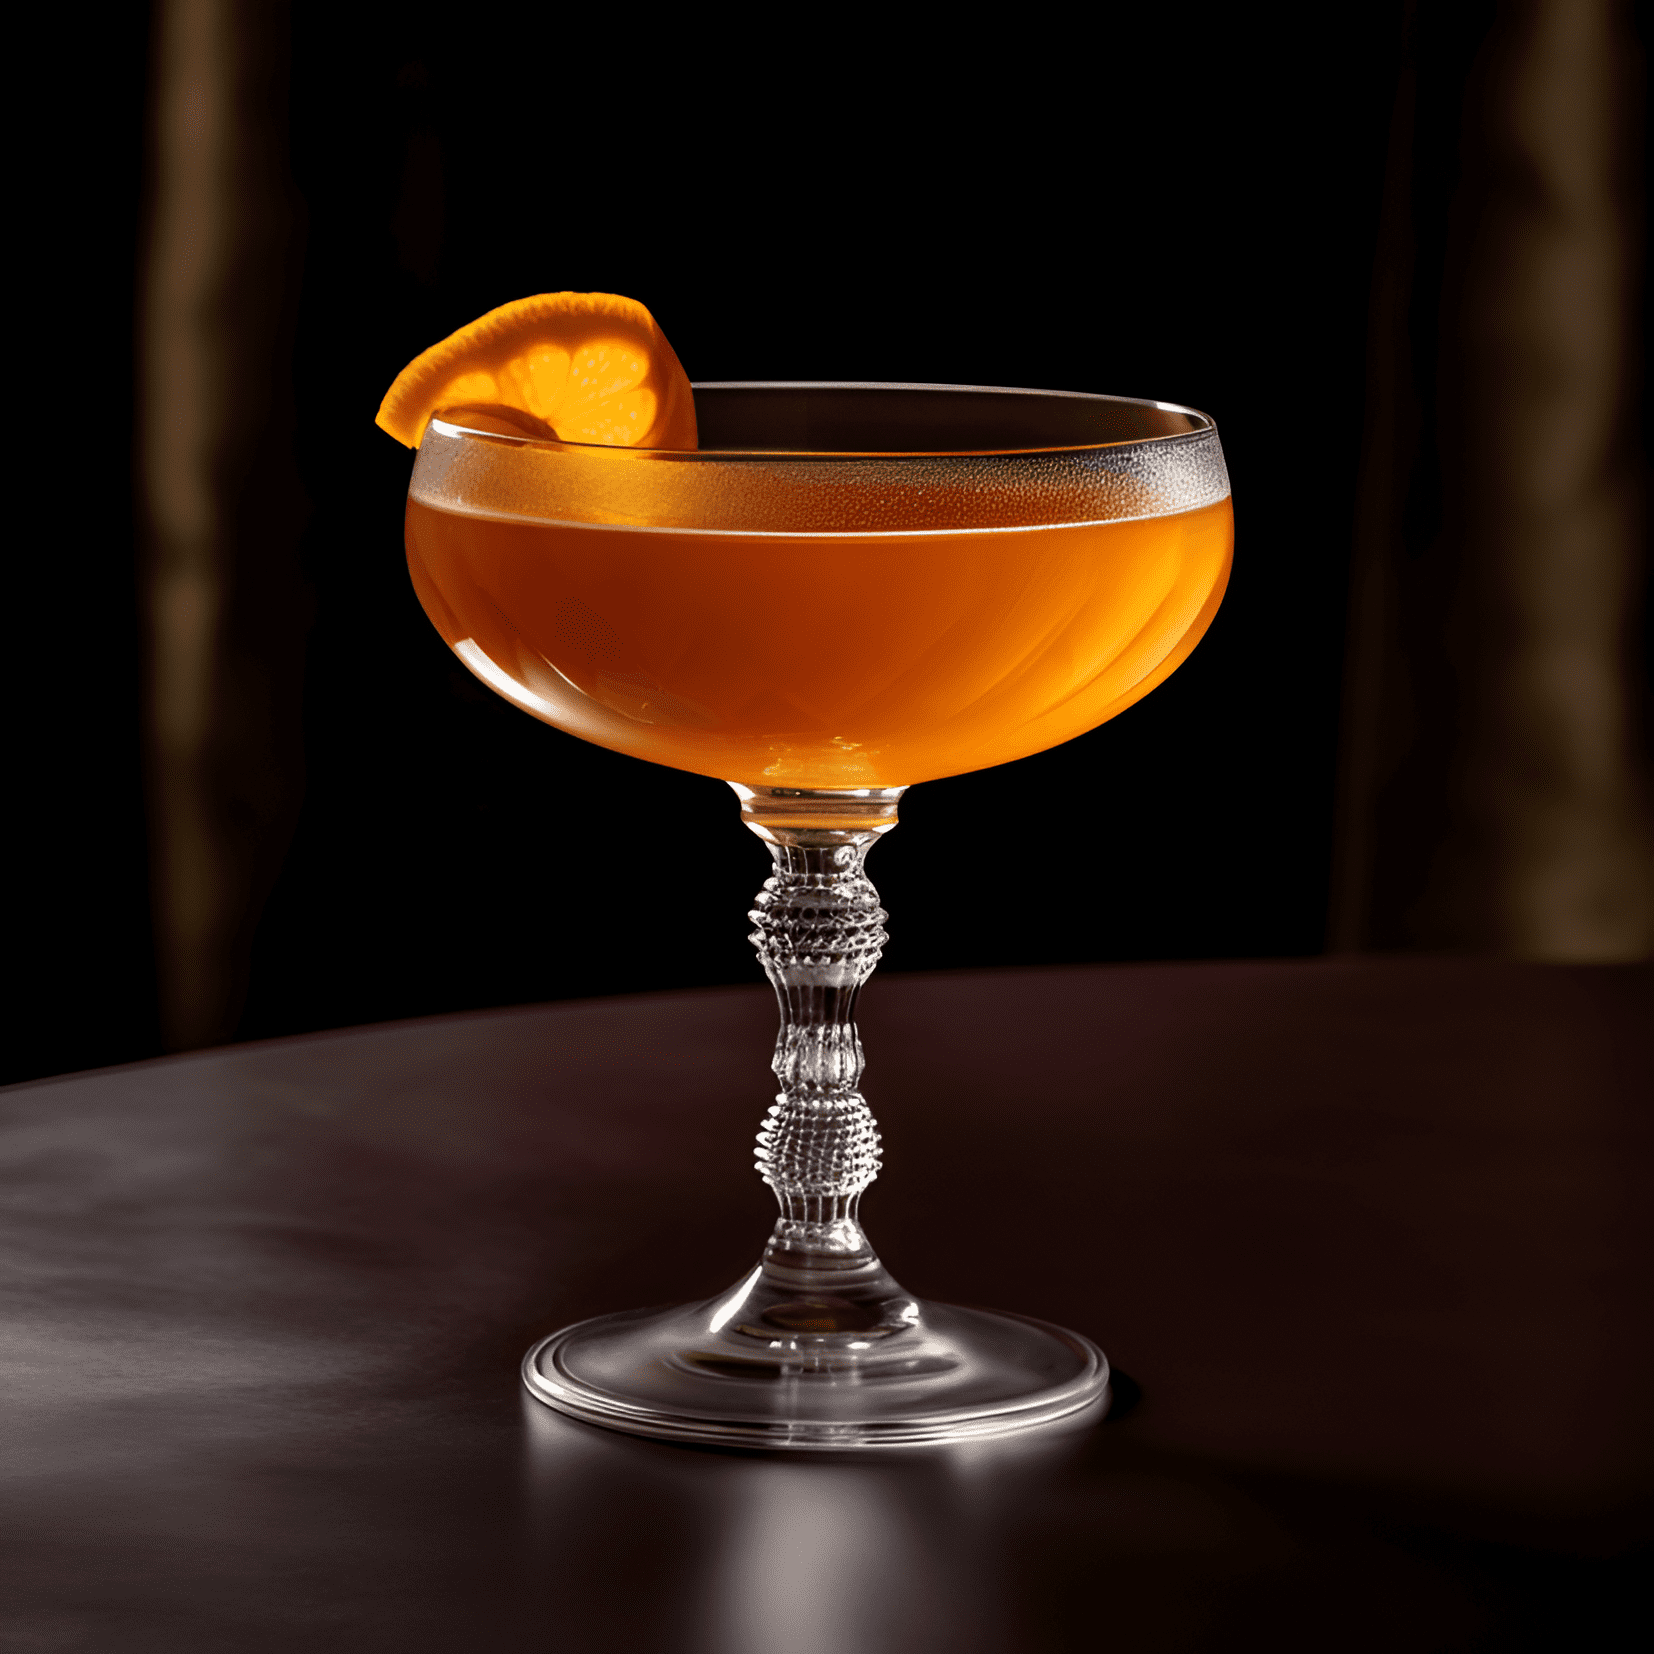 Dutch Courage Cocktail Recipe - The Dutch Courage cocktail is a bold, strong, and slightly bitter drink with a hint of citrus and herbal notes. The combination of Jenever, orange bitters, and vermouth creates a complex and well-balanced flavor profile.